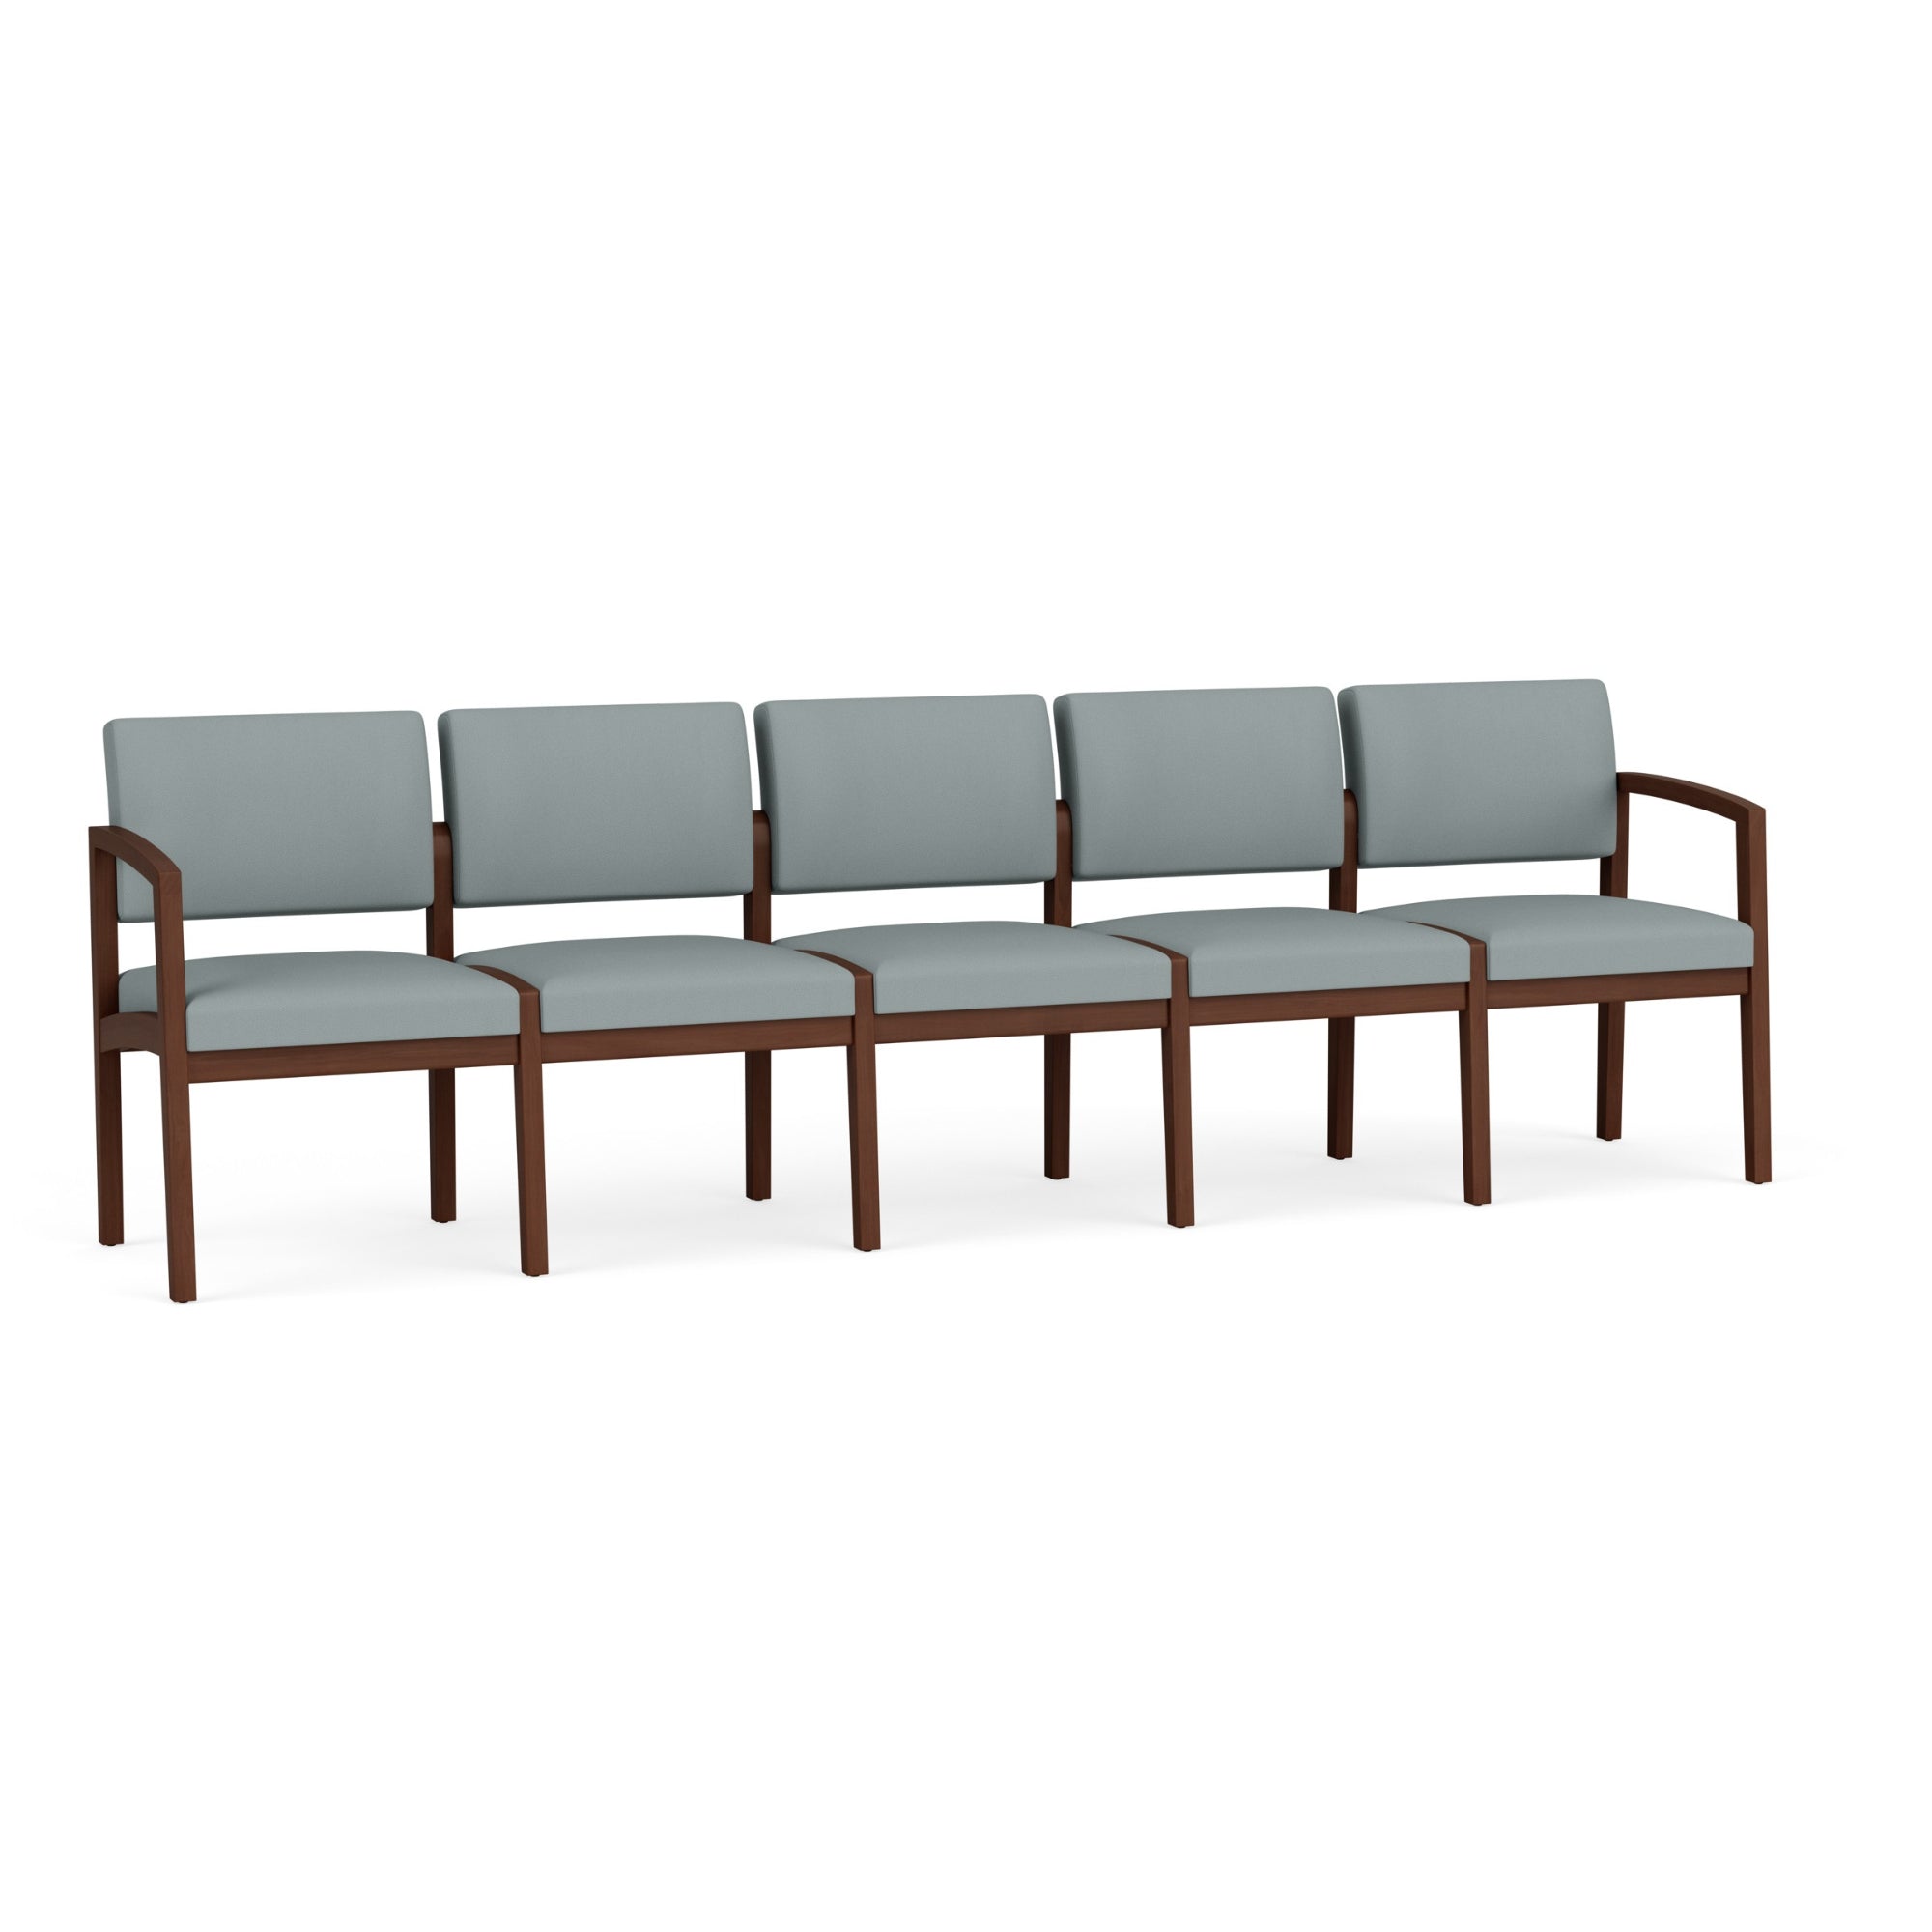 Lenox Wood Collection Reception Seating, 5 Seat Sofa, Standard Vinyl Upholstery, FREE SHIPPING